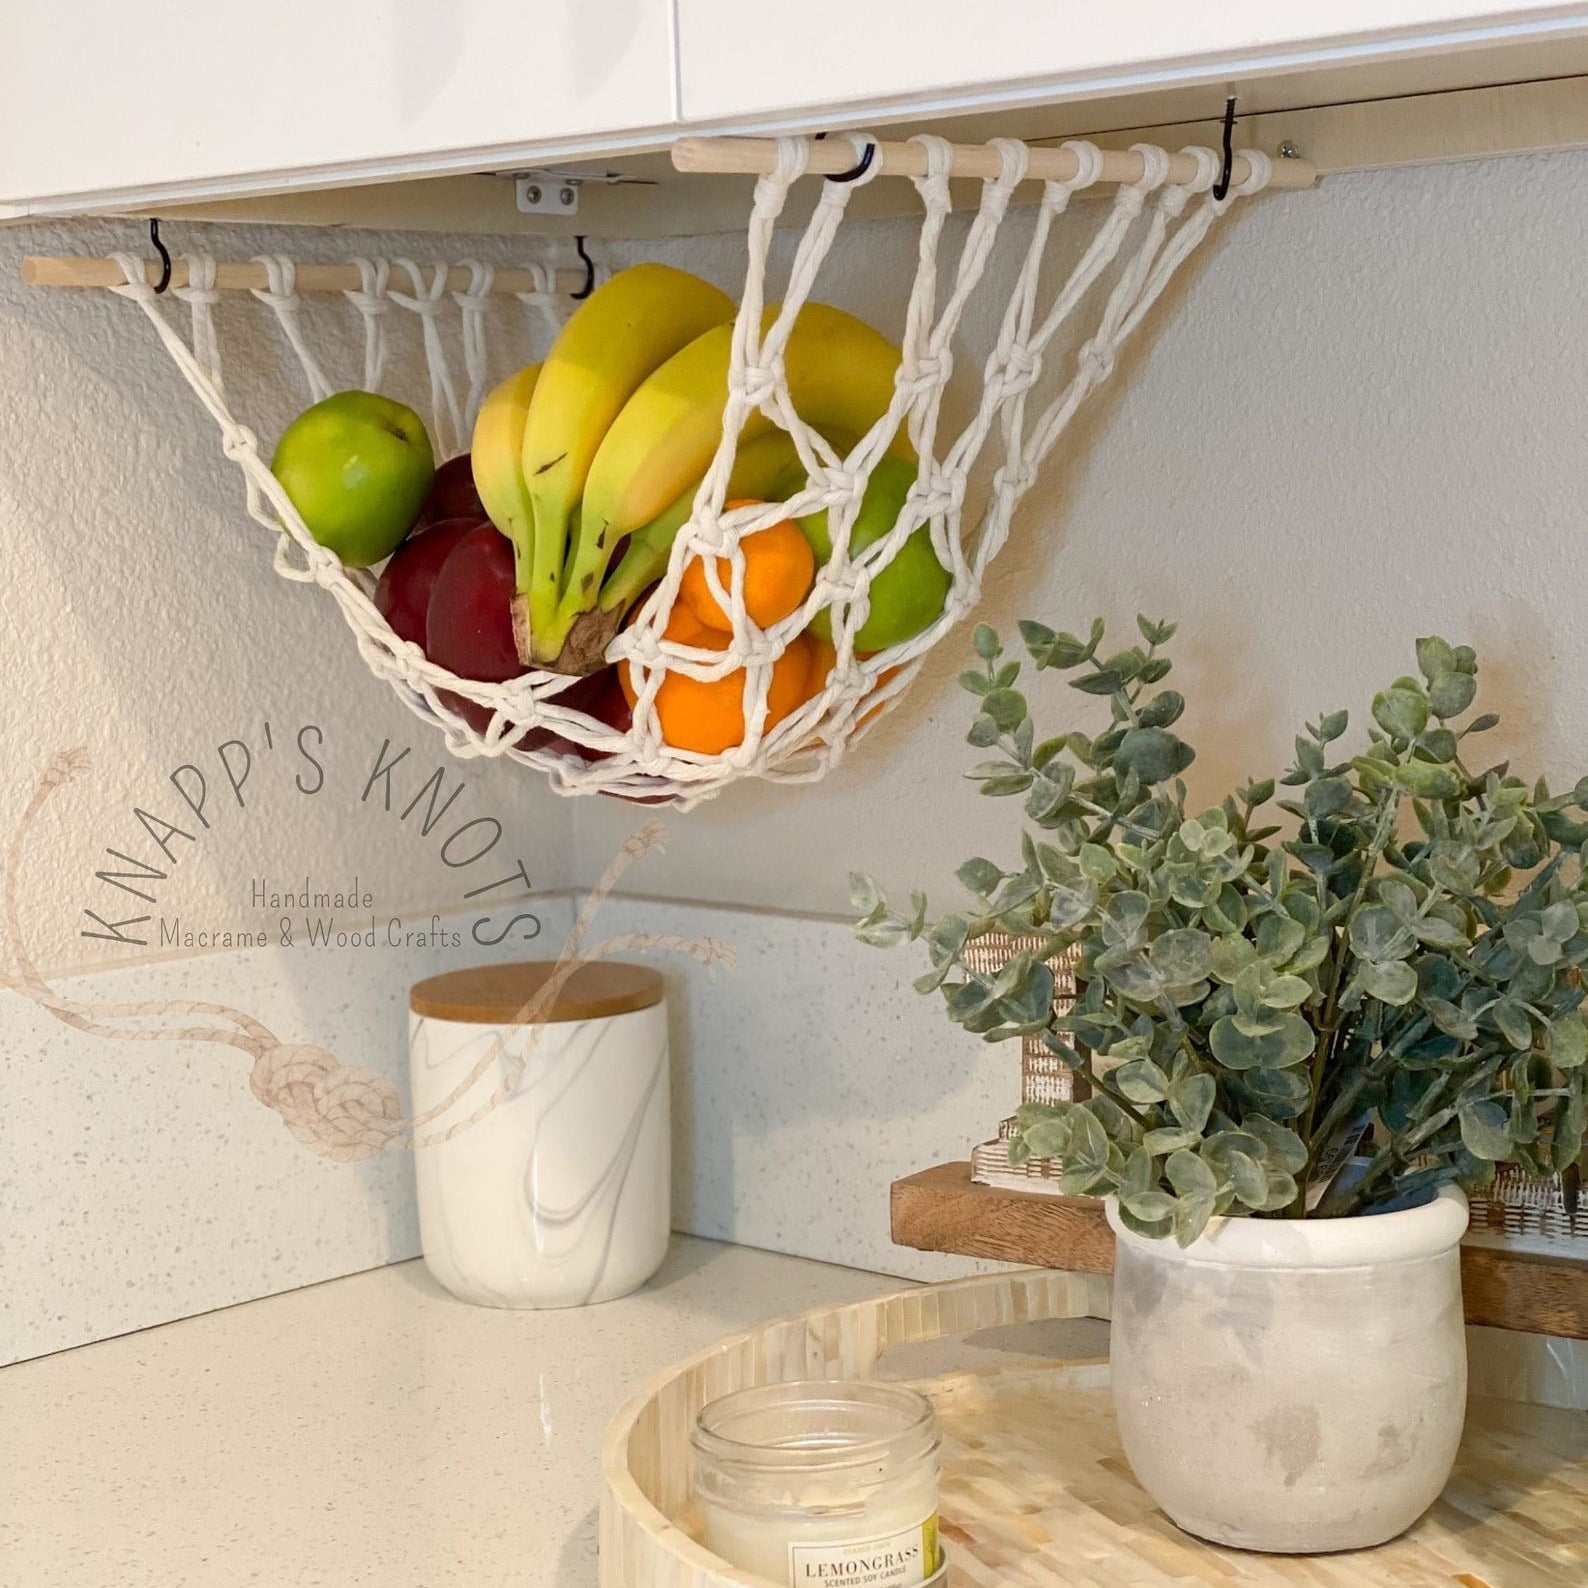 31 Kitchen Organization Products To Help You Declutter